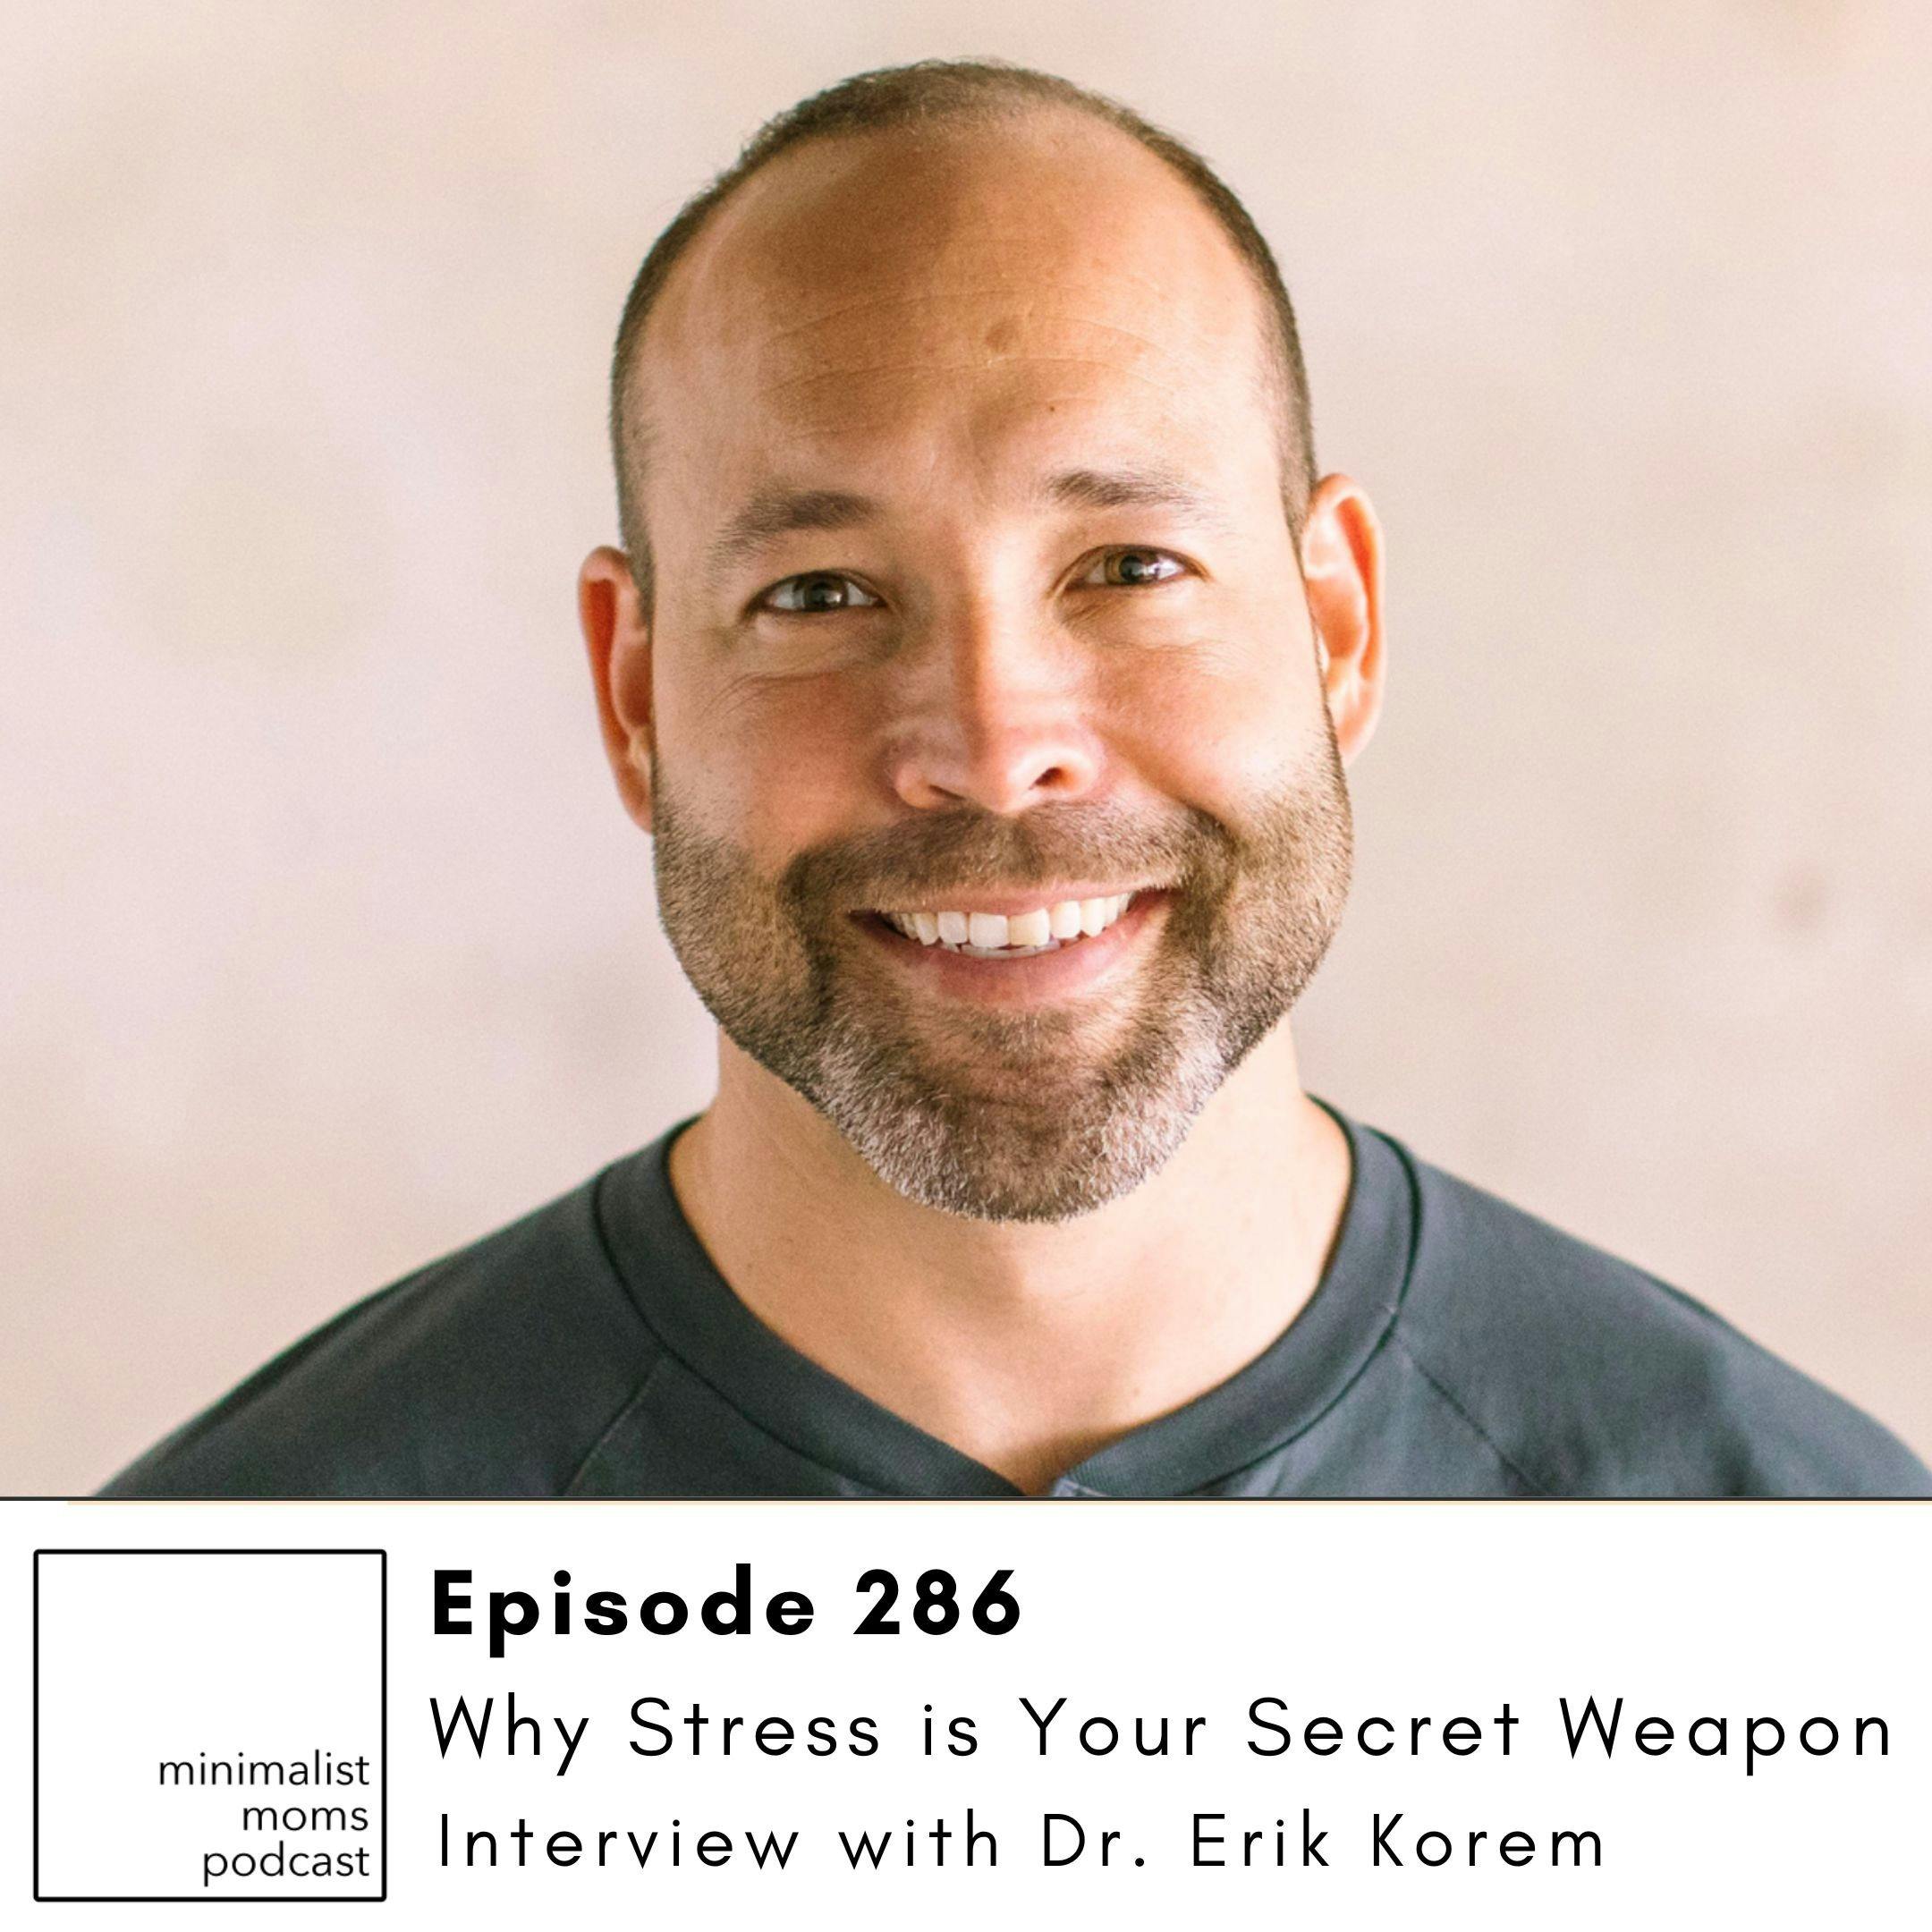 EP286: Why Stress is Your Secret Weapon with Erik Korem